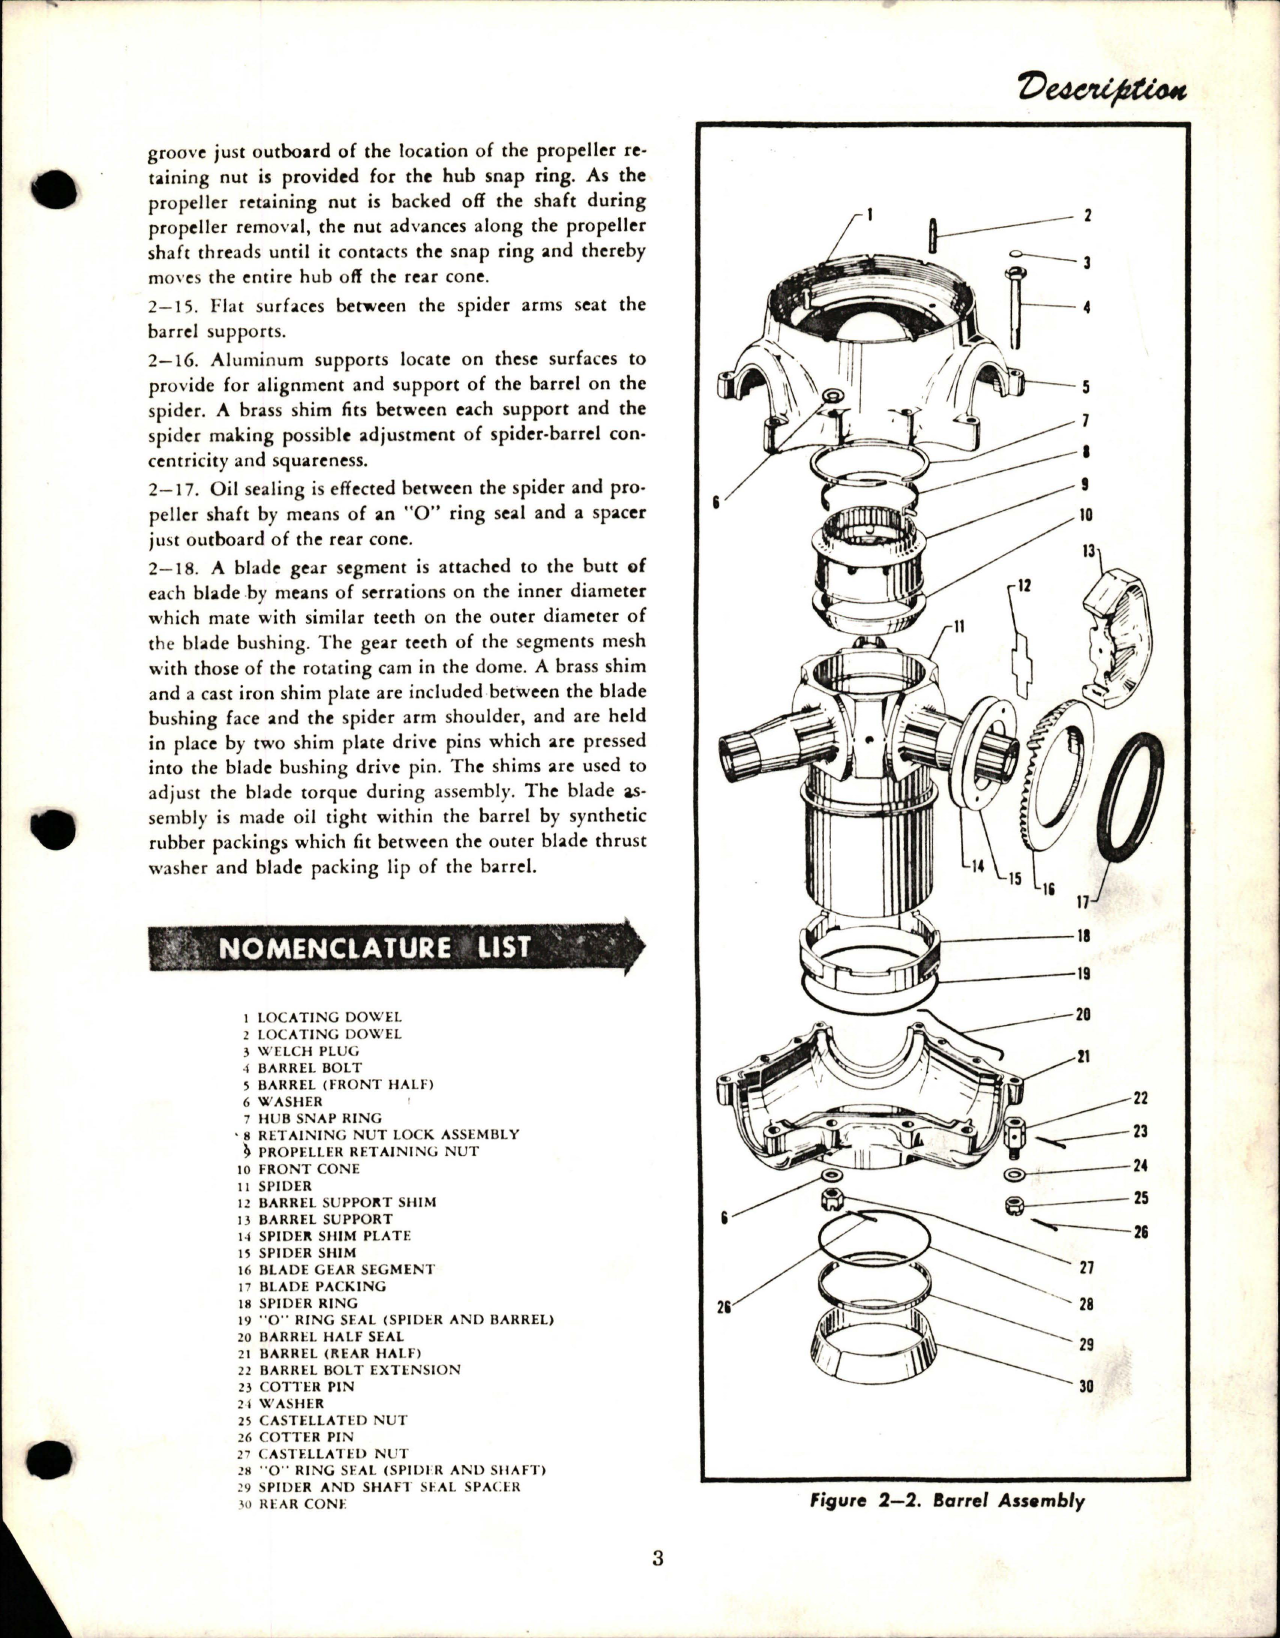 Sample page 5 from AirCorps Library document: Operation and Service Instructions for Reversing Hydromatic Propeller - Model 43E60 